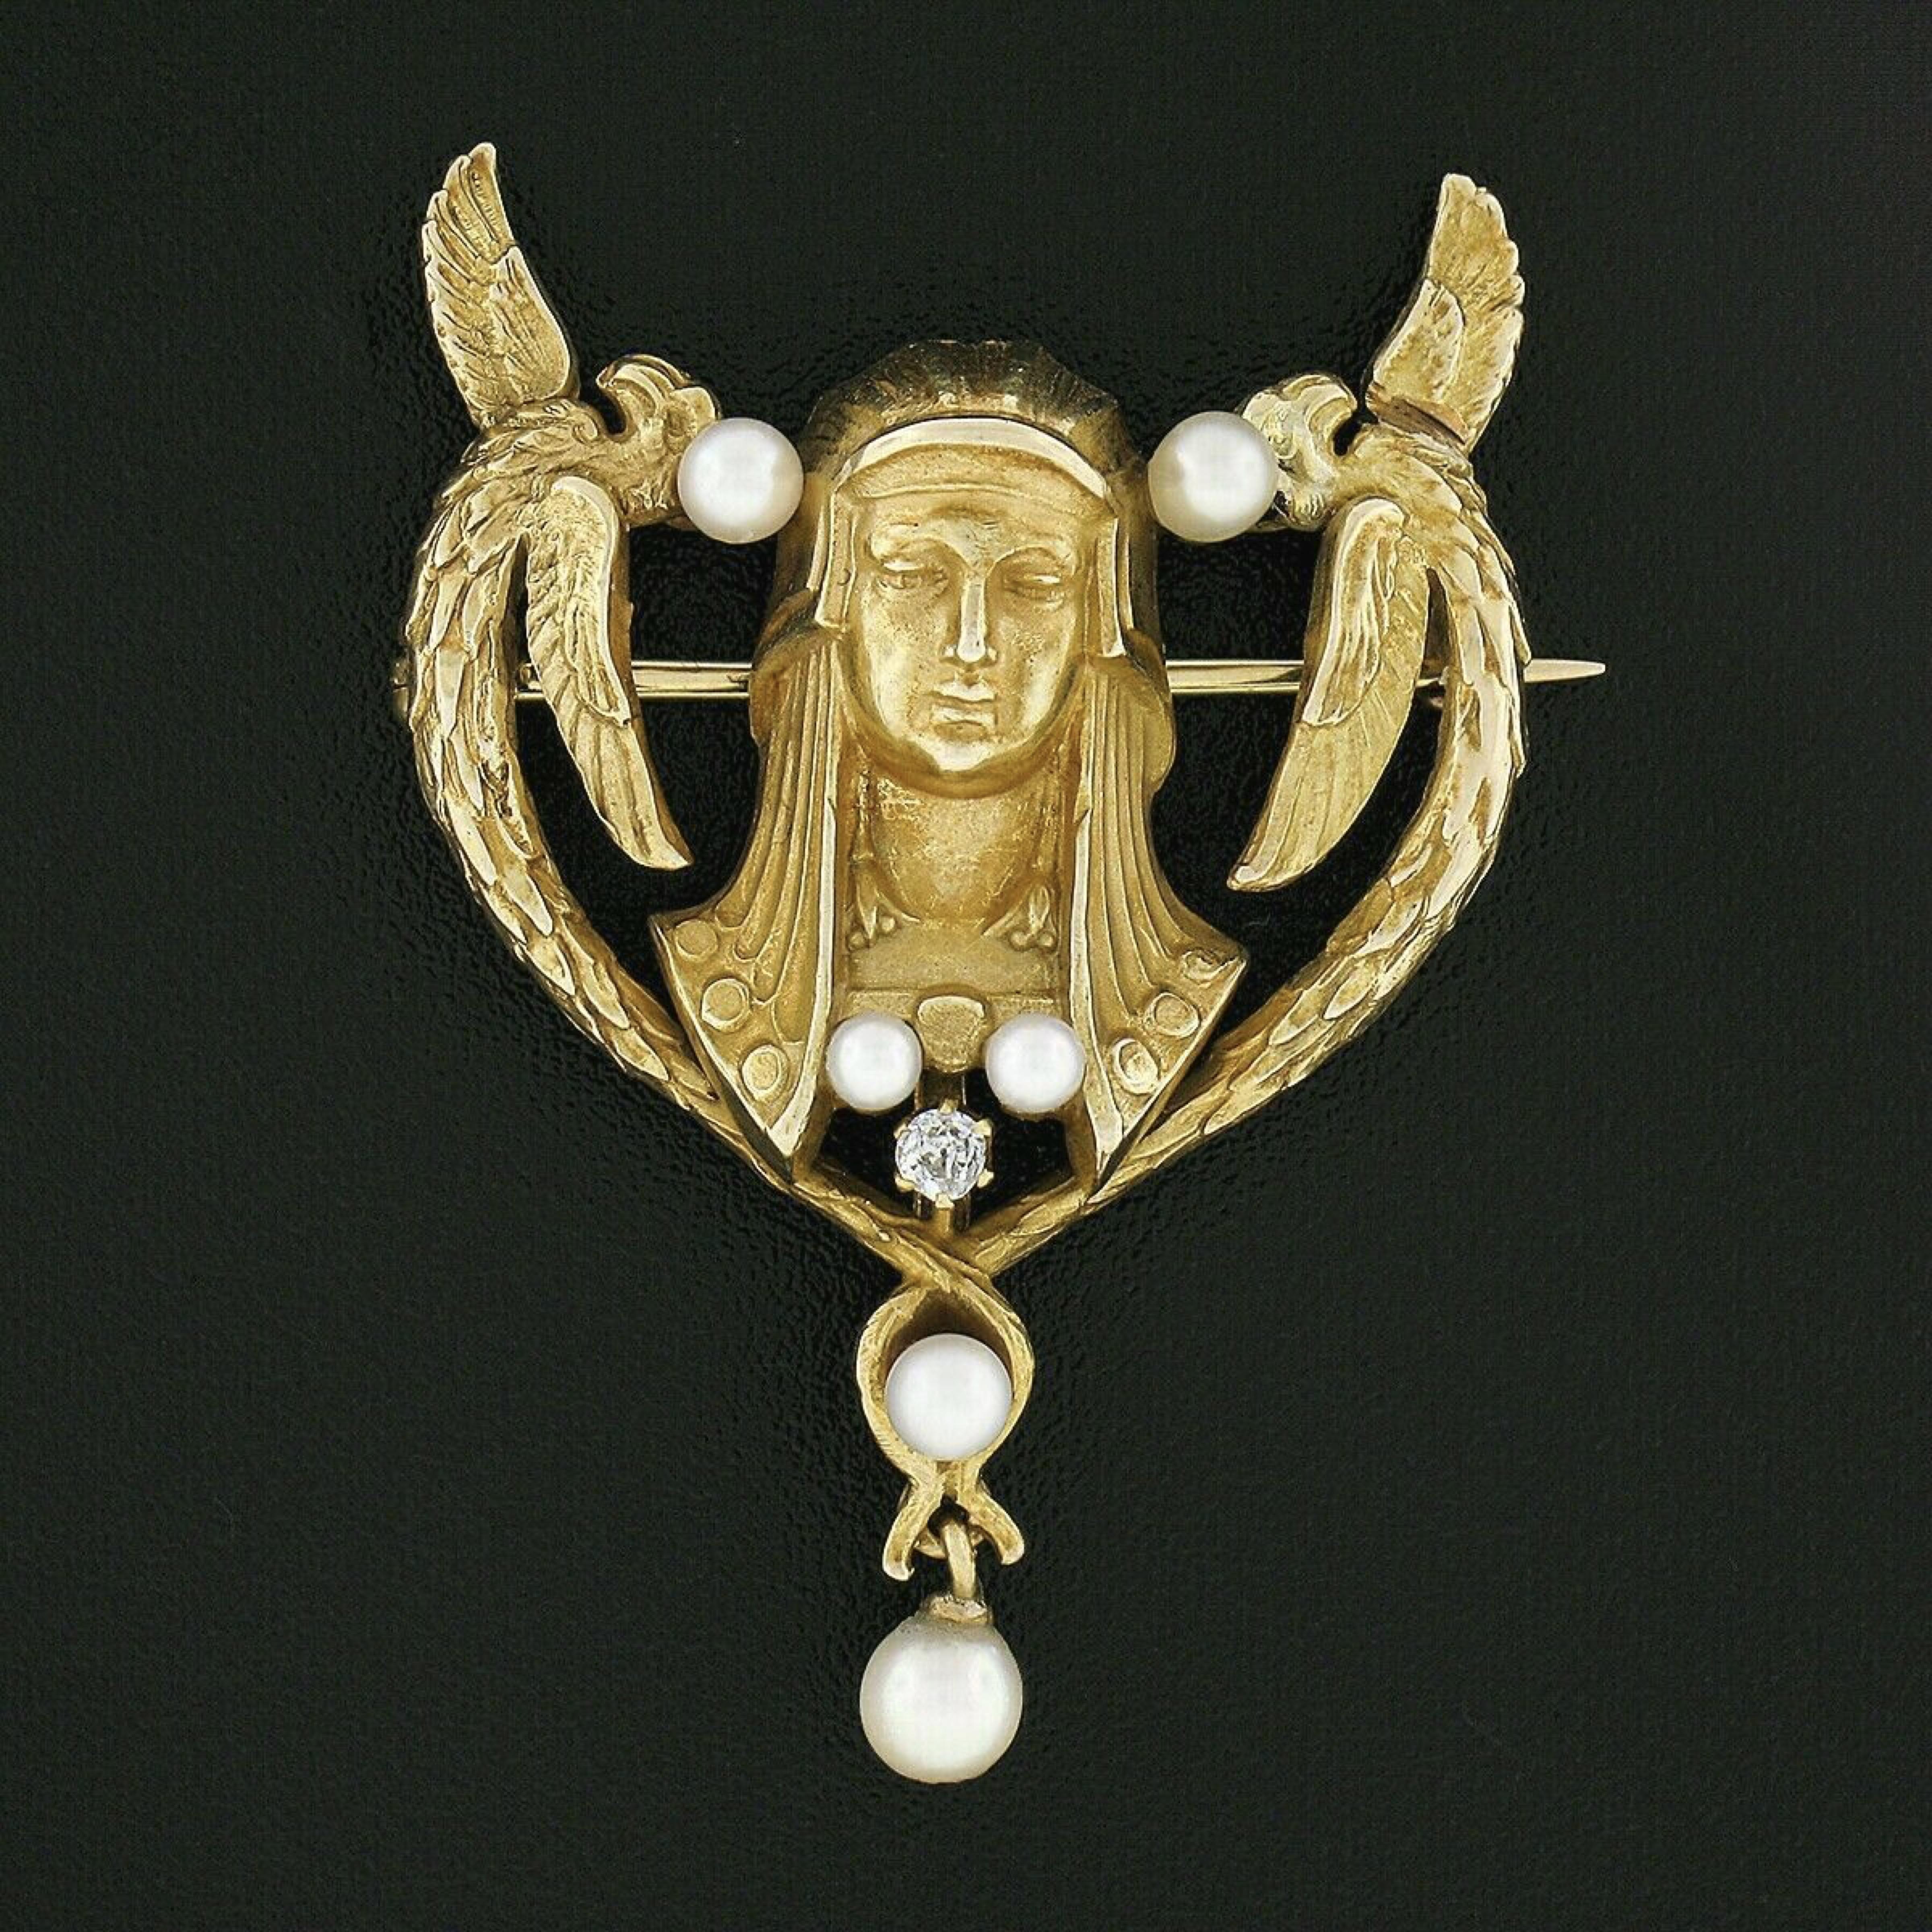 This outstanding antique brooch was crafted during the art nouveau era from solid 14k yellow gold and features a beautiful Egyptian revival design set with a fine quality natural diamond and lovely cultured pearls throughout. The brooch displays an